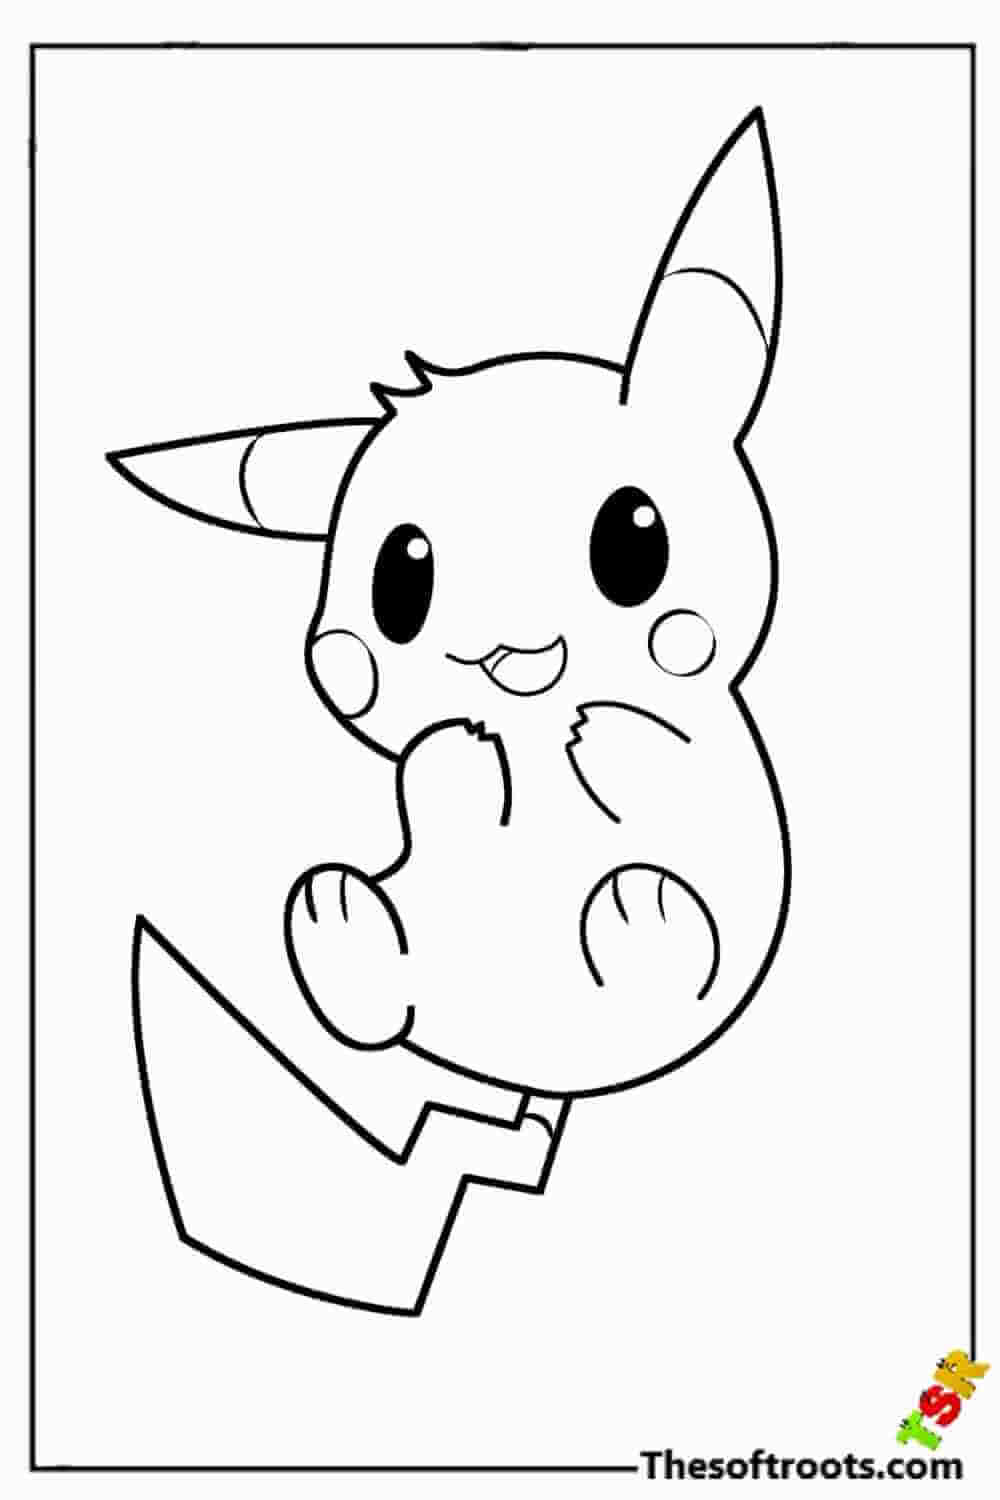 Baby Pikachu coloring pages